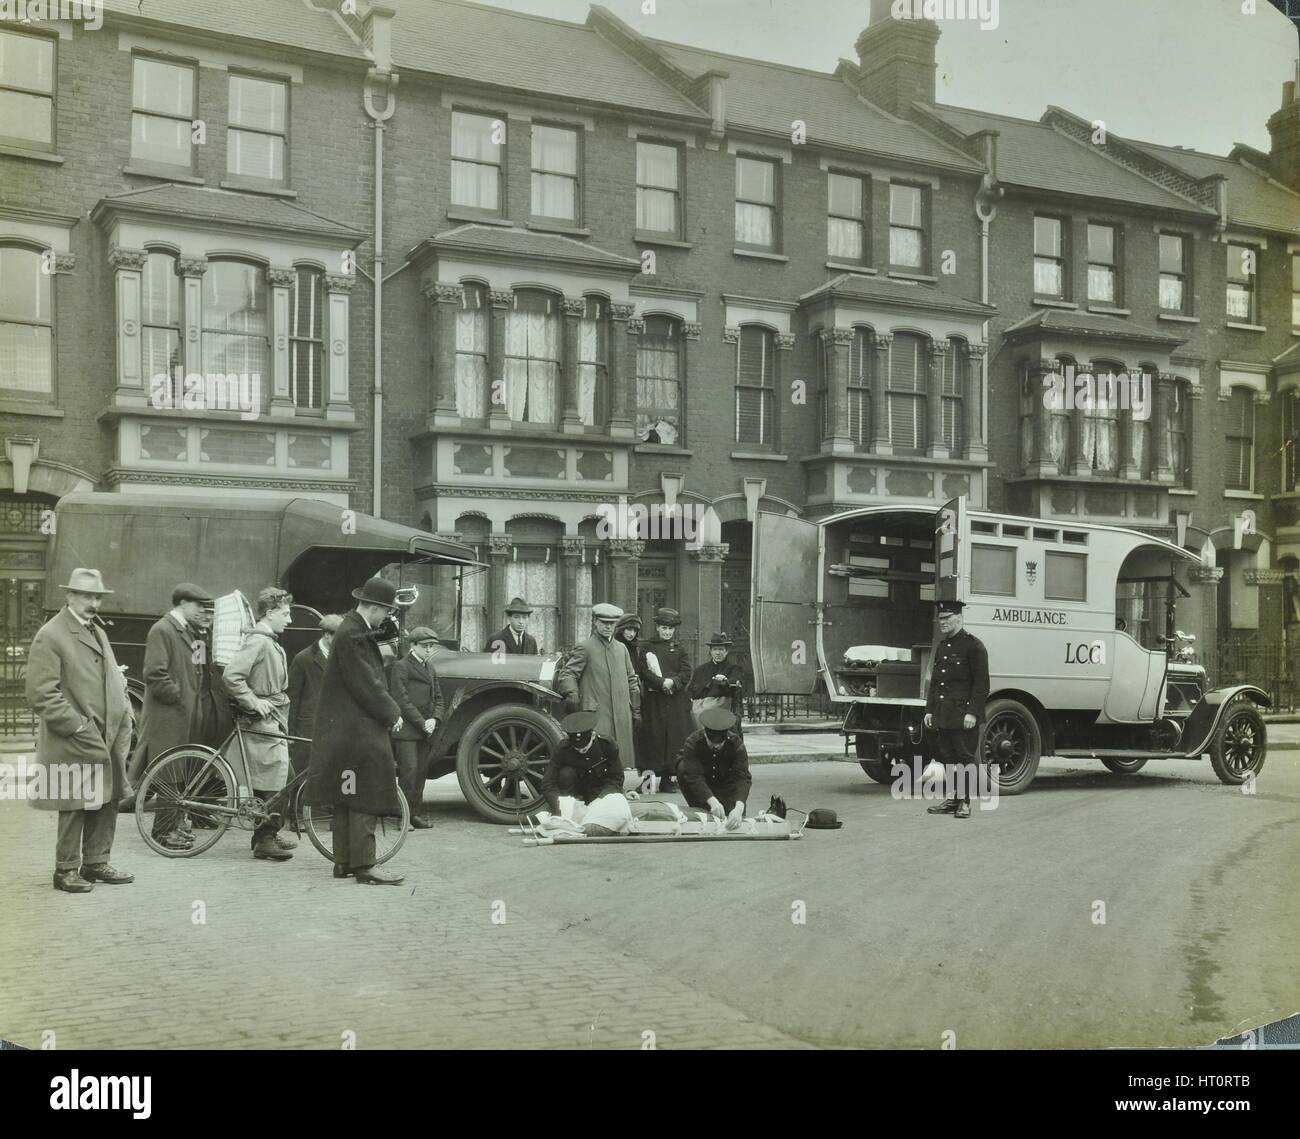 Road accident, Calabria road, Islington, London, 1925. Artist: Unknown. Stock Photo